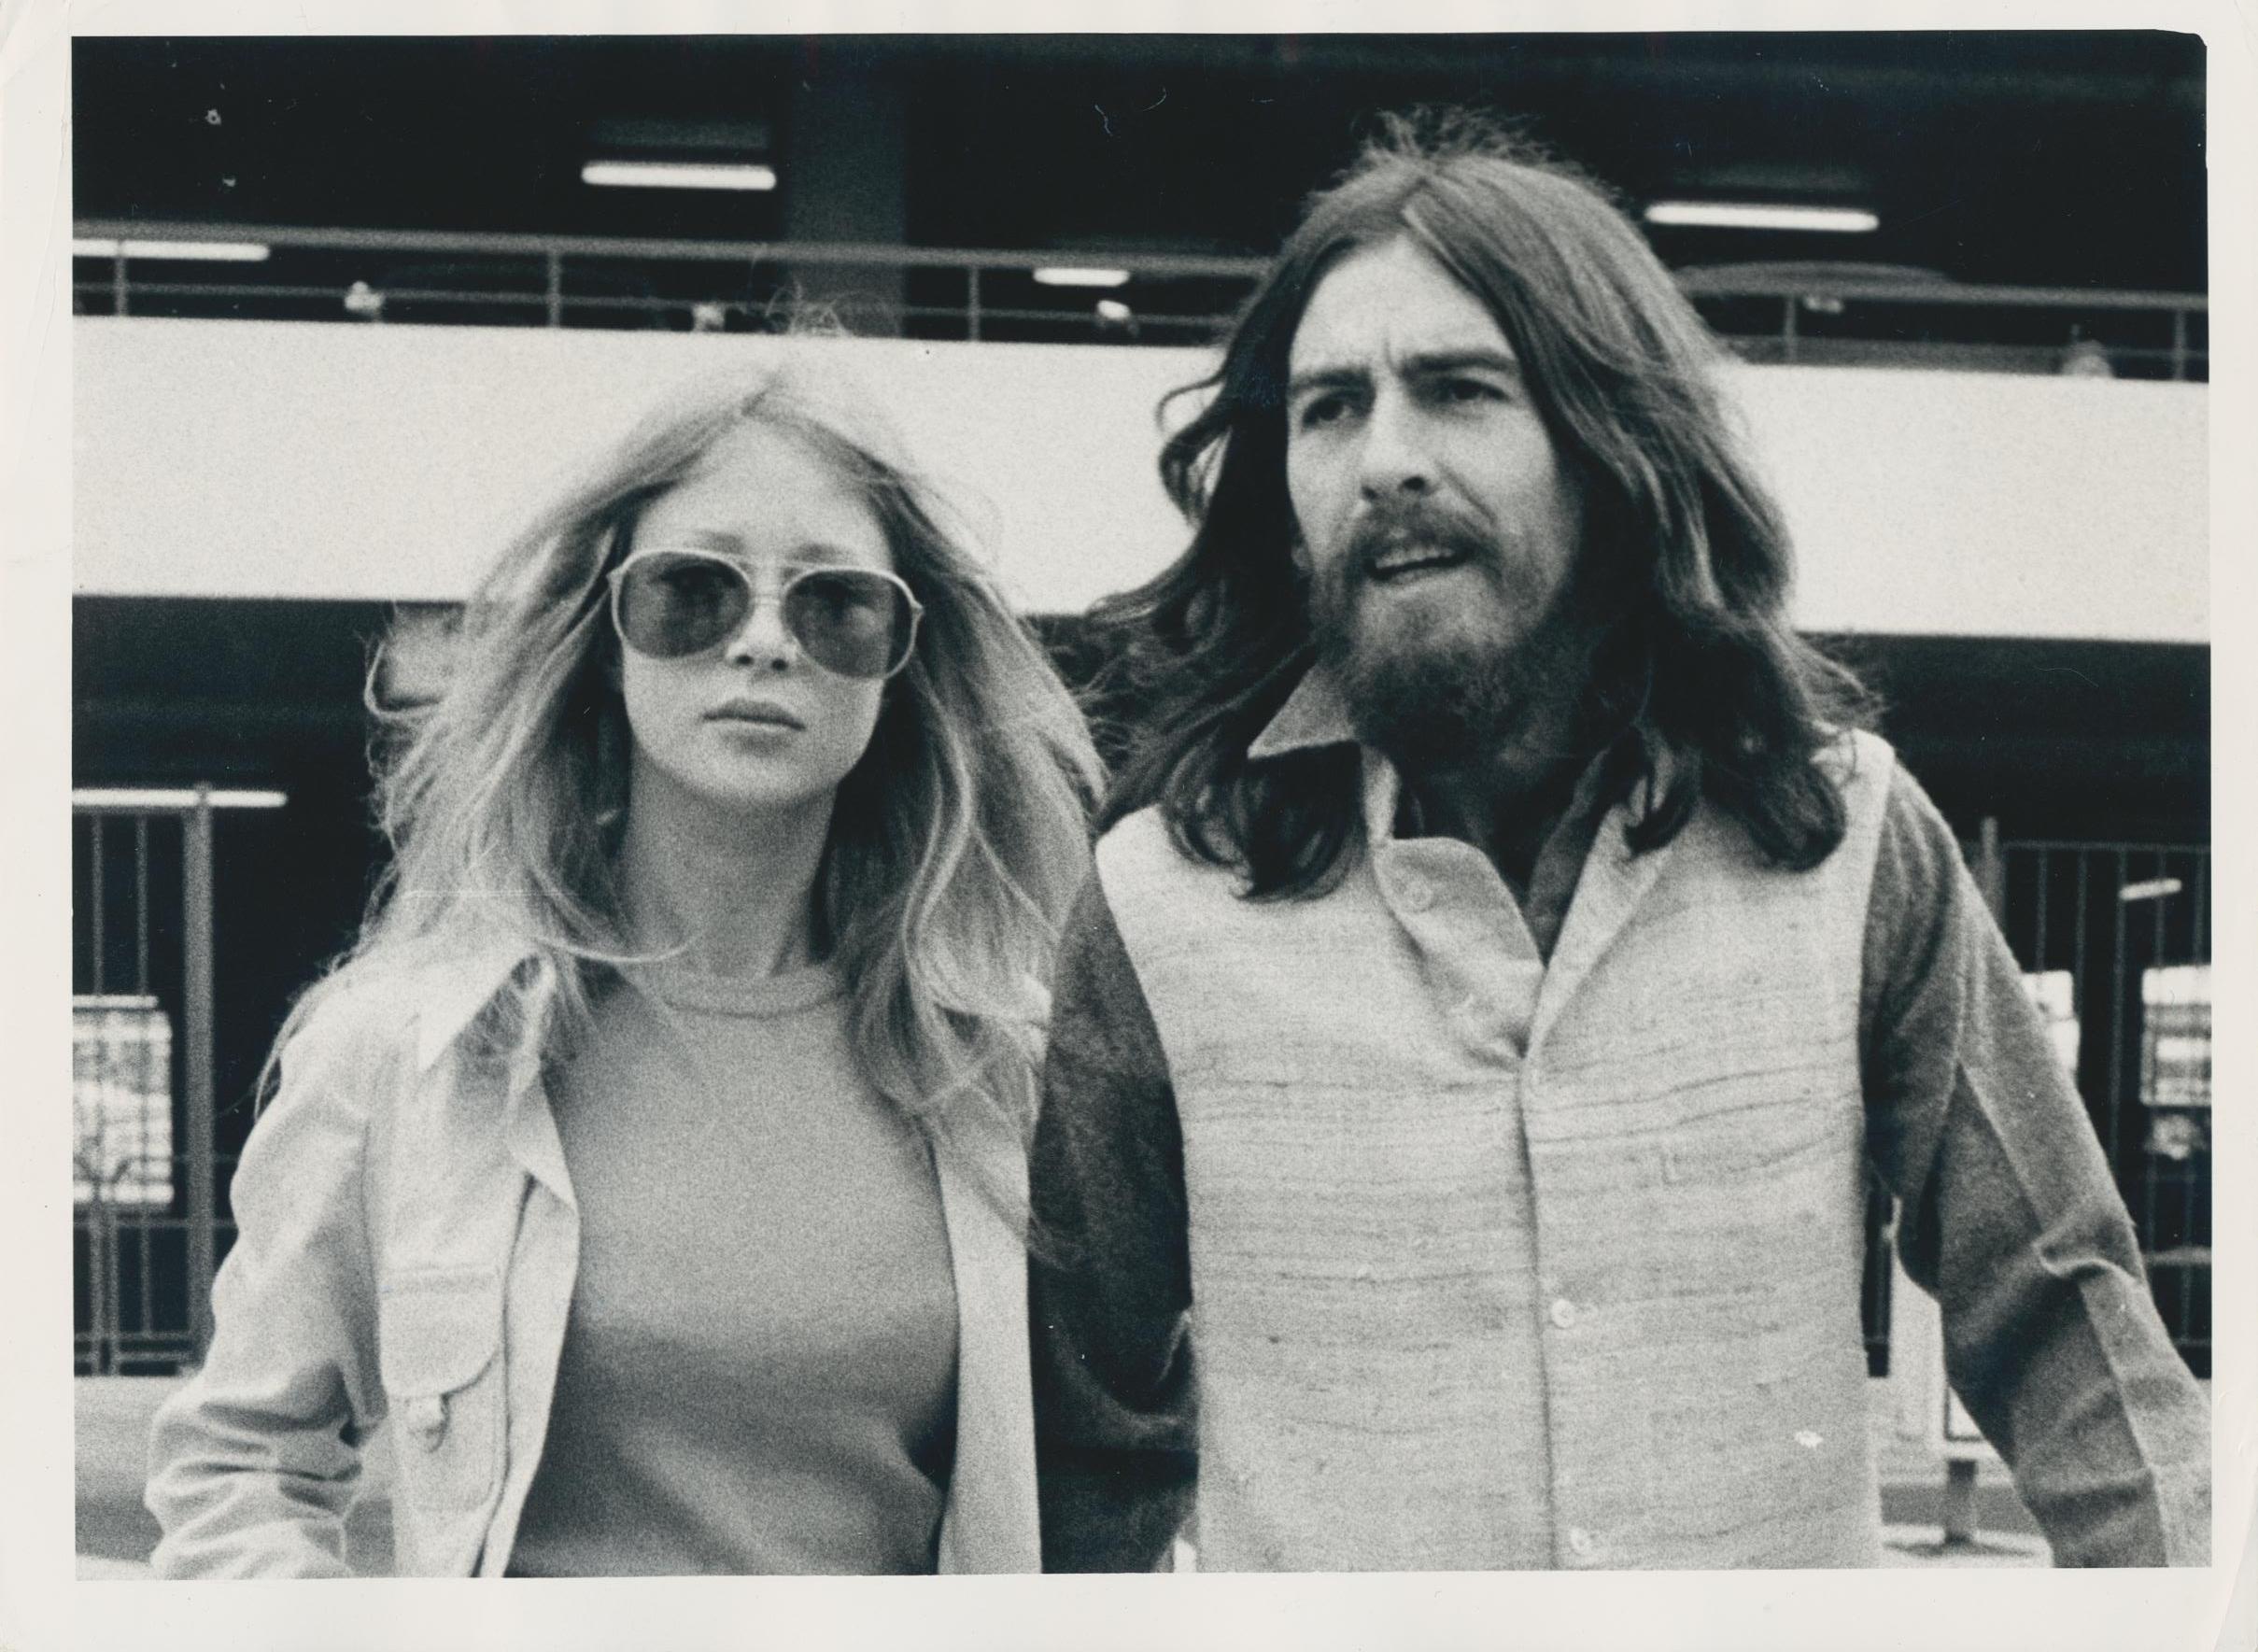 Unknown Portrait Photograph - George Harrison and partner, Black and White Photography, 20, 5 x 15, 1 cm